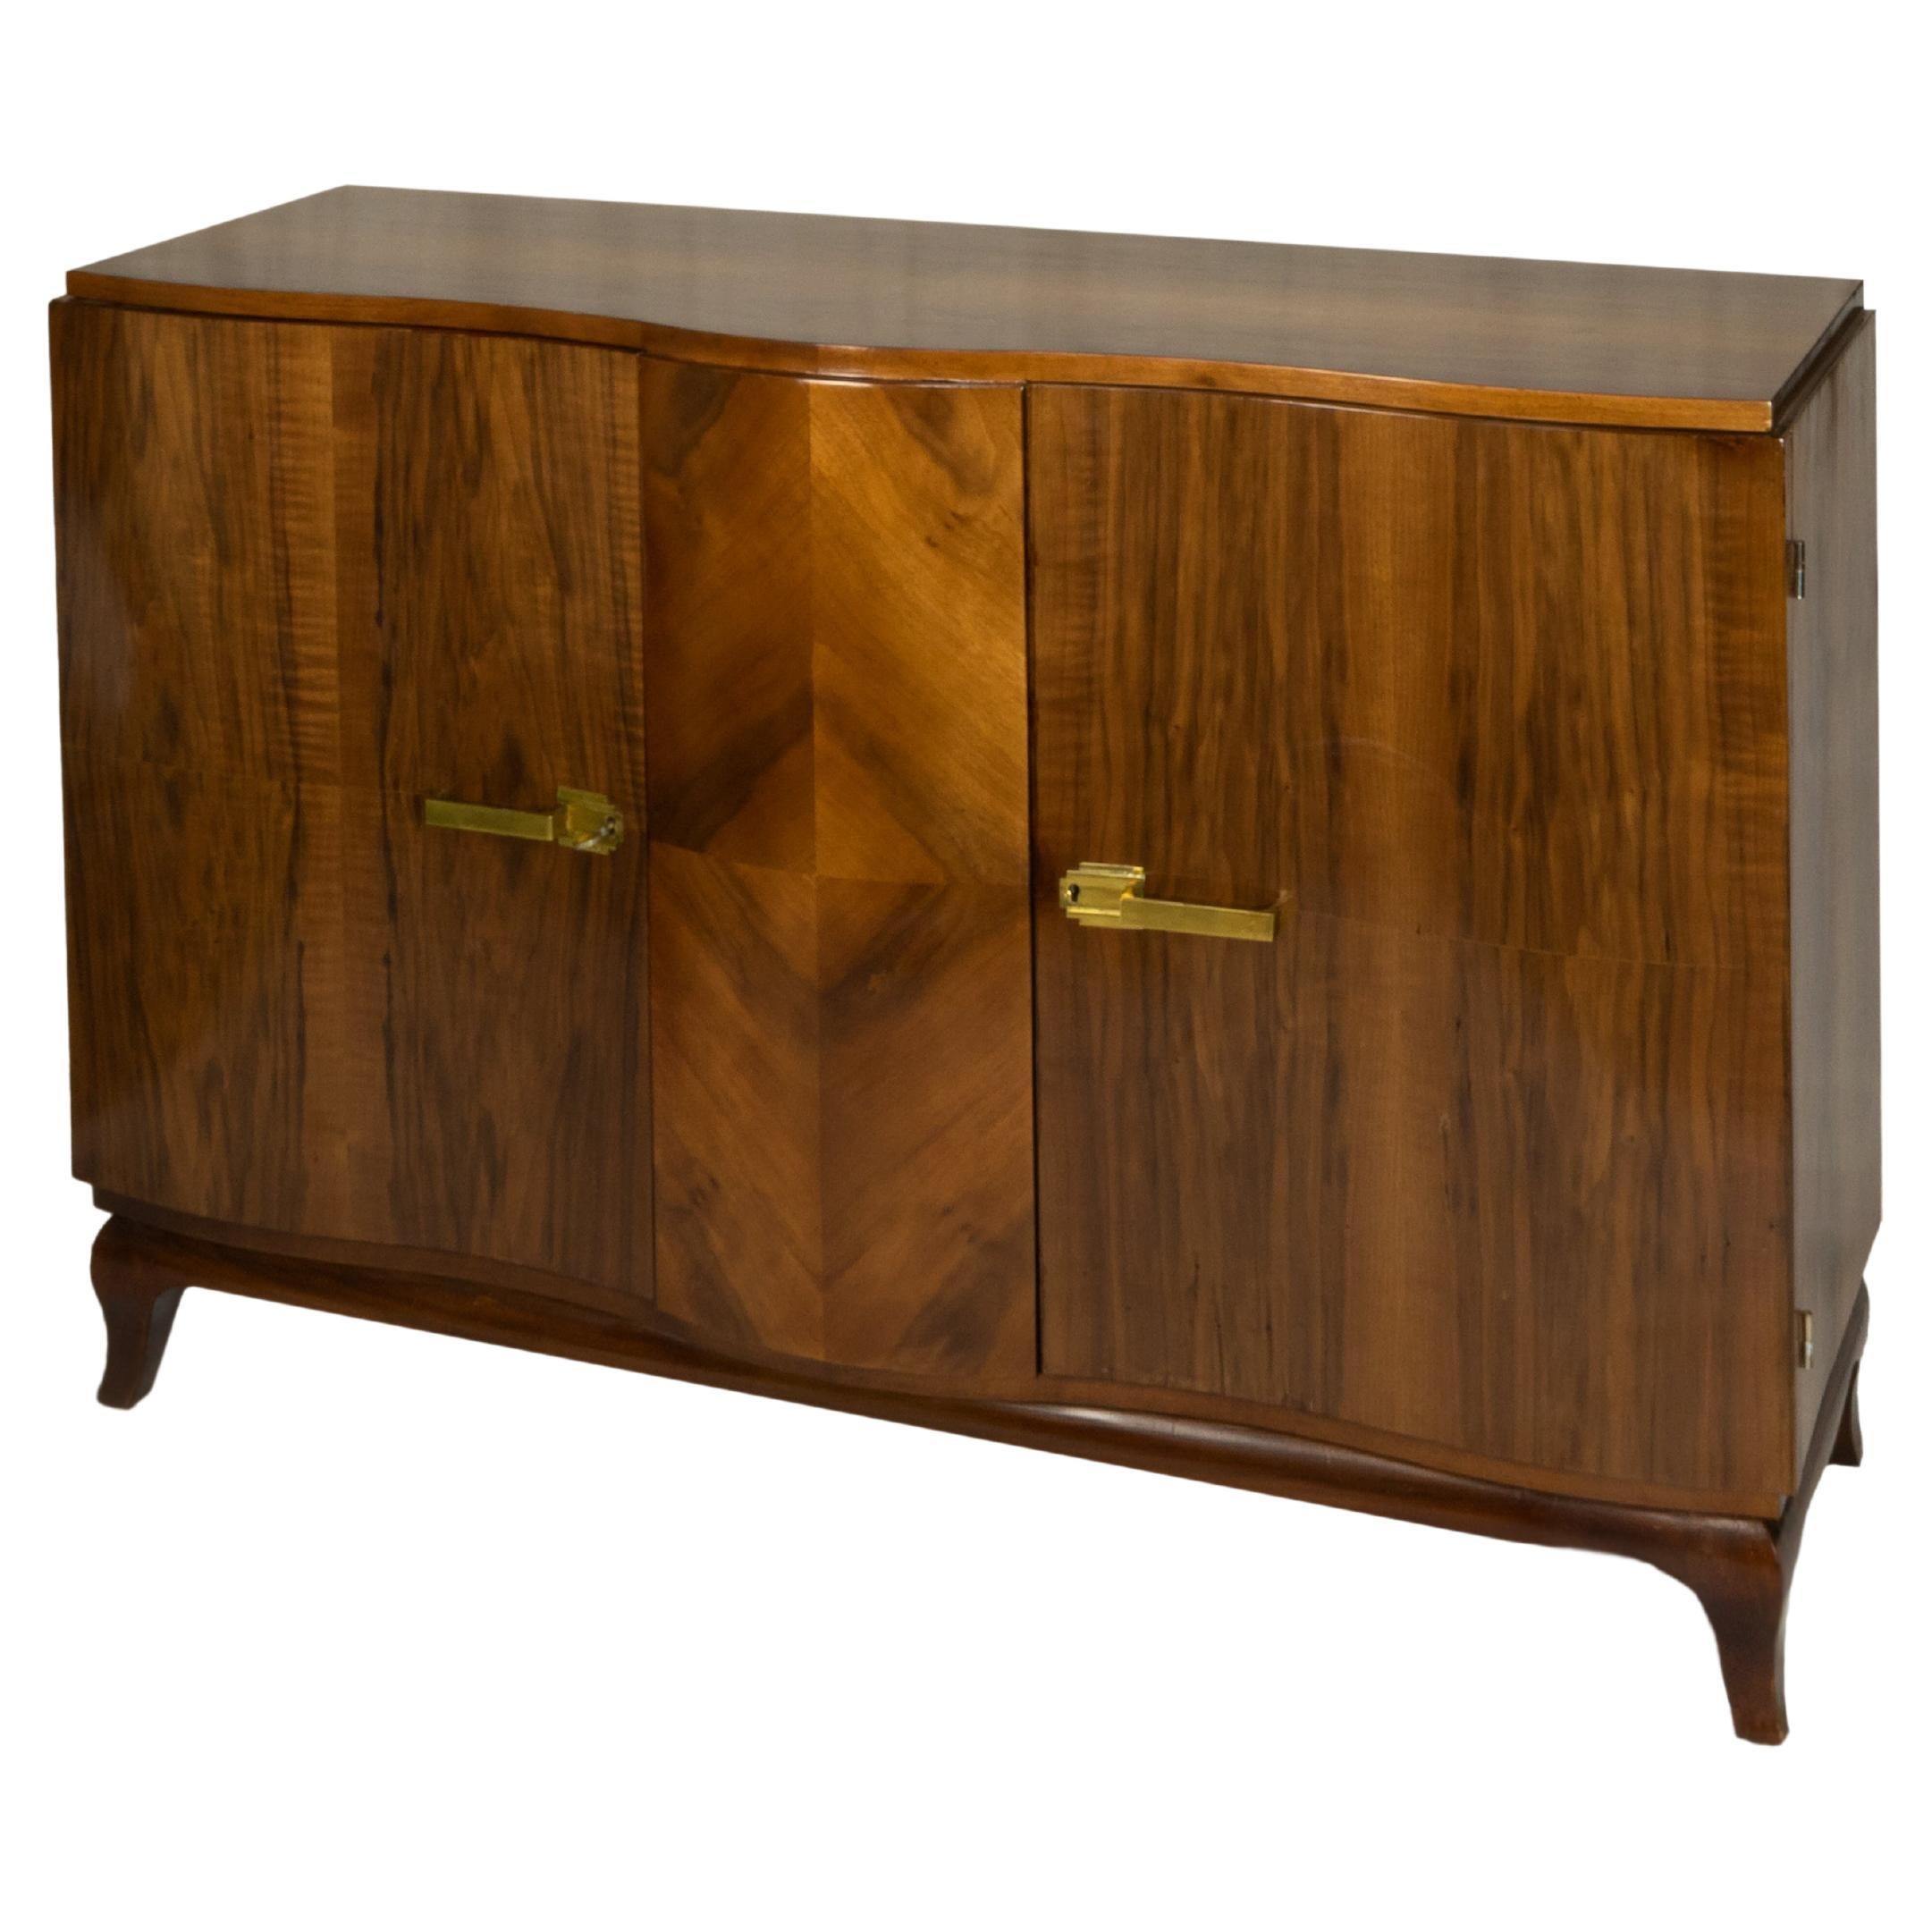 With four flared legs, symmetrical and elegant, this french walnut sideboard has two two doors.
Ideal for an apartment, balanced size and golden hardware.
